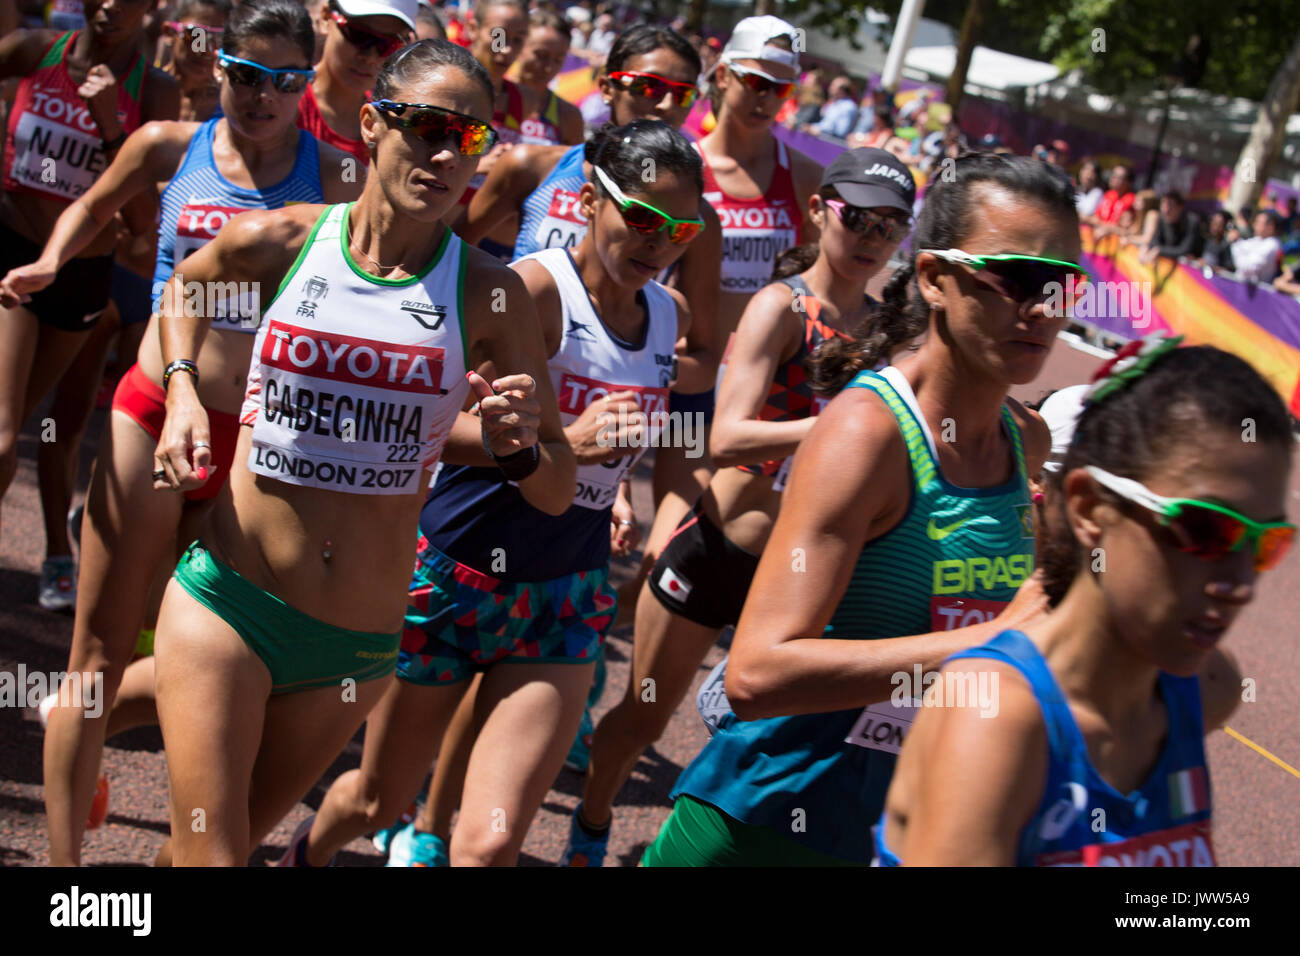 London, UK. 13th August, 2017. Cabecinha at 20 k women Race Walk at IAAF World Championships in London, UK on August 13, 2017. The race took place on The Mall, most picturesque street of London and attracted thousands spectators. Credit: Dominika Zarzycka/Alamy Live News Stock Photo